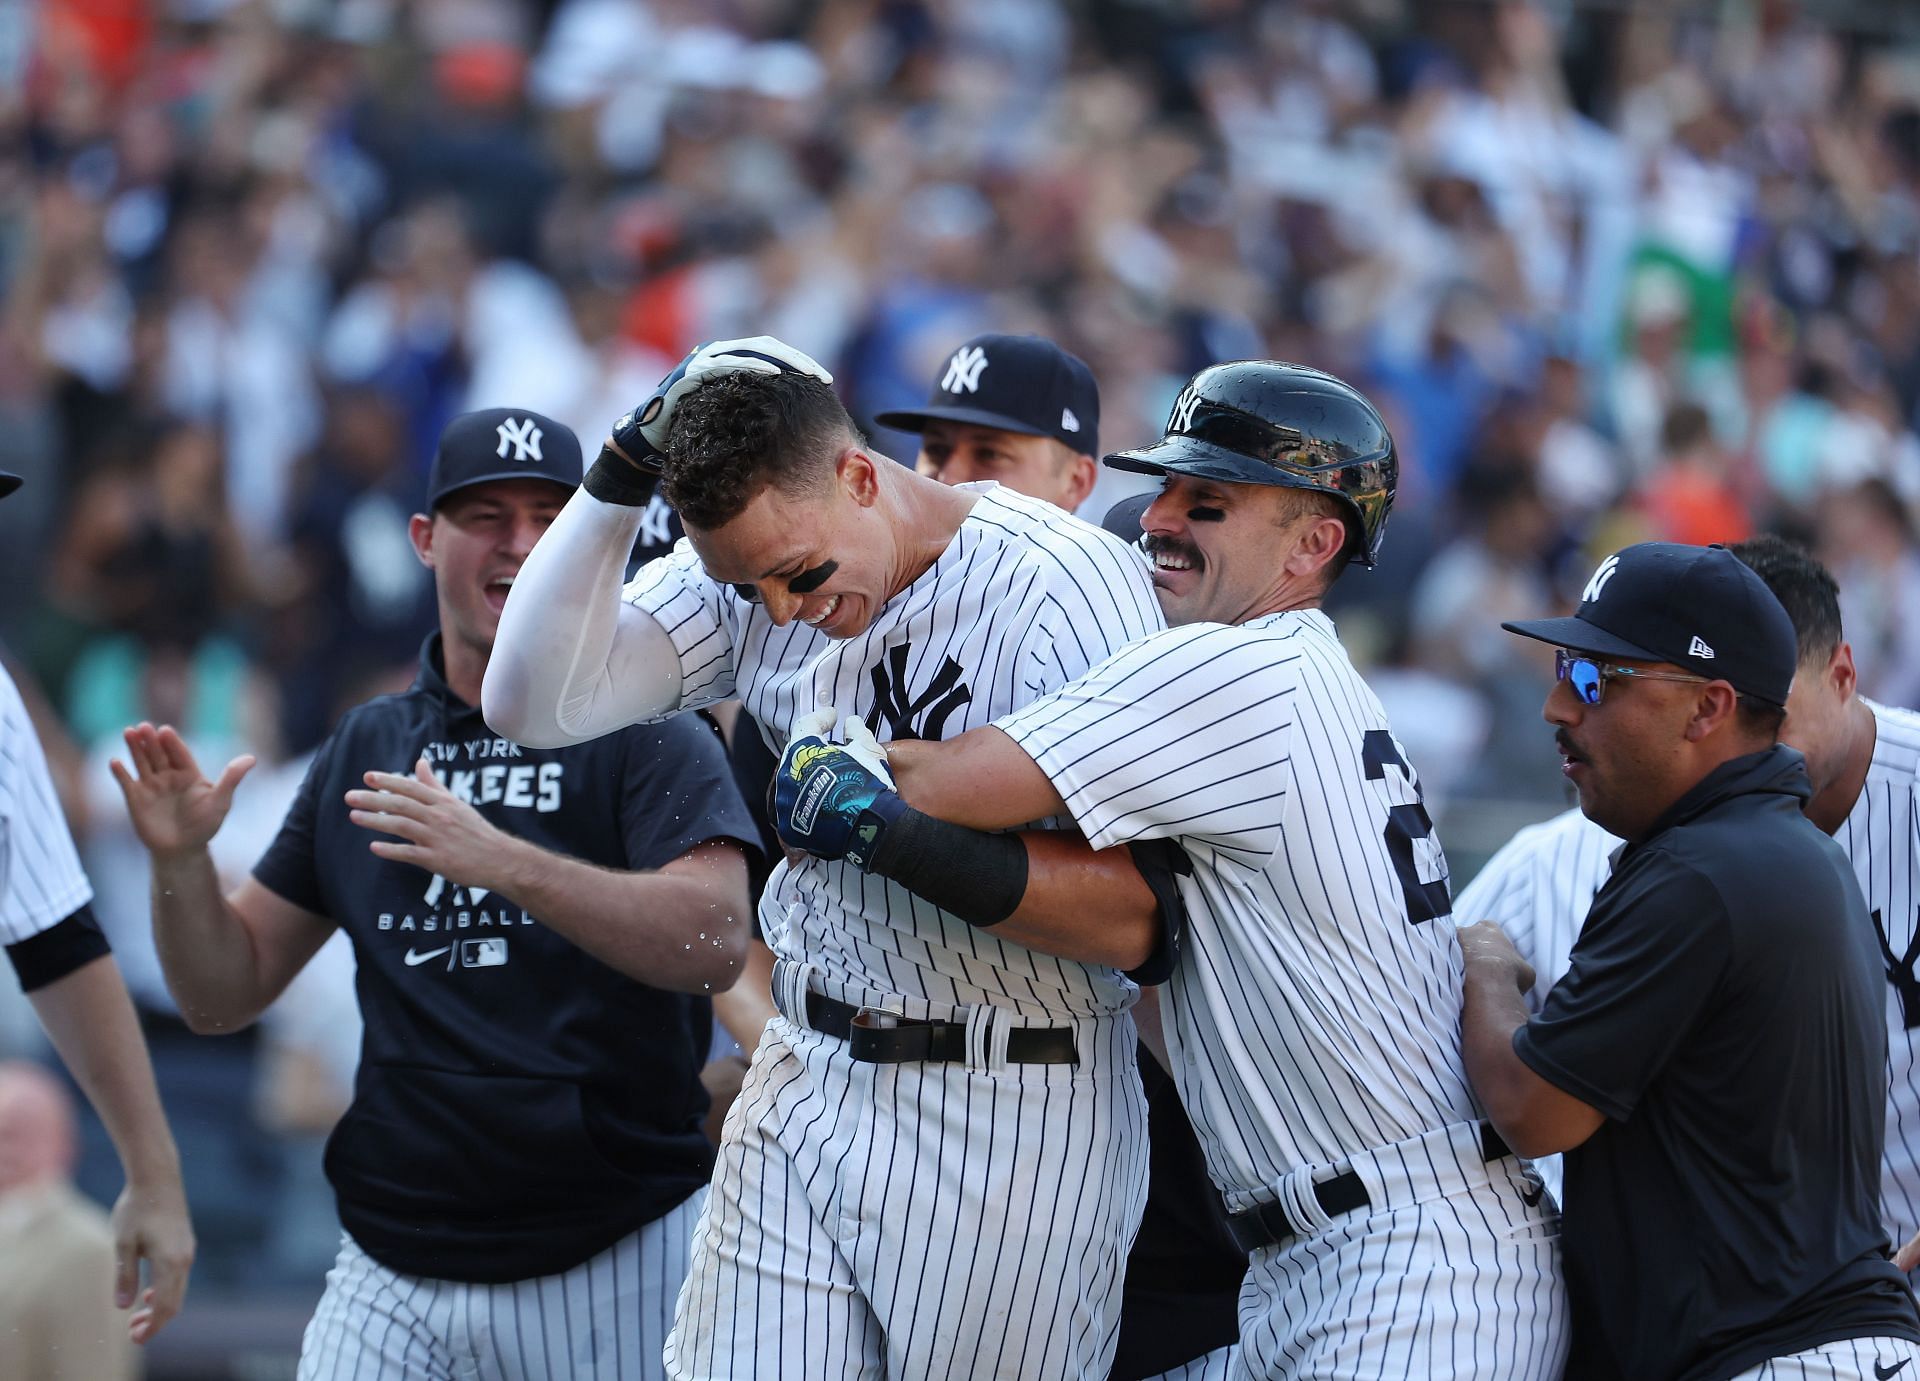 Why is the Yankees game blacked out today? How to bypass restrictions by changing DNS